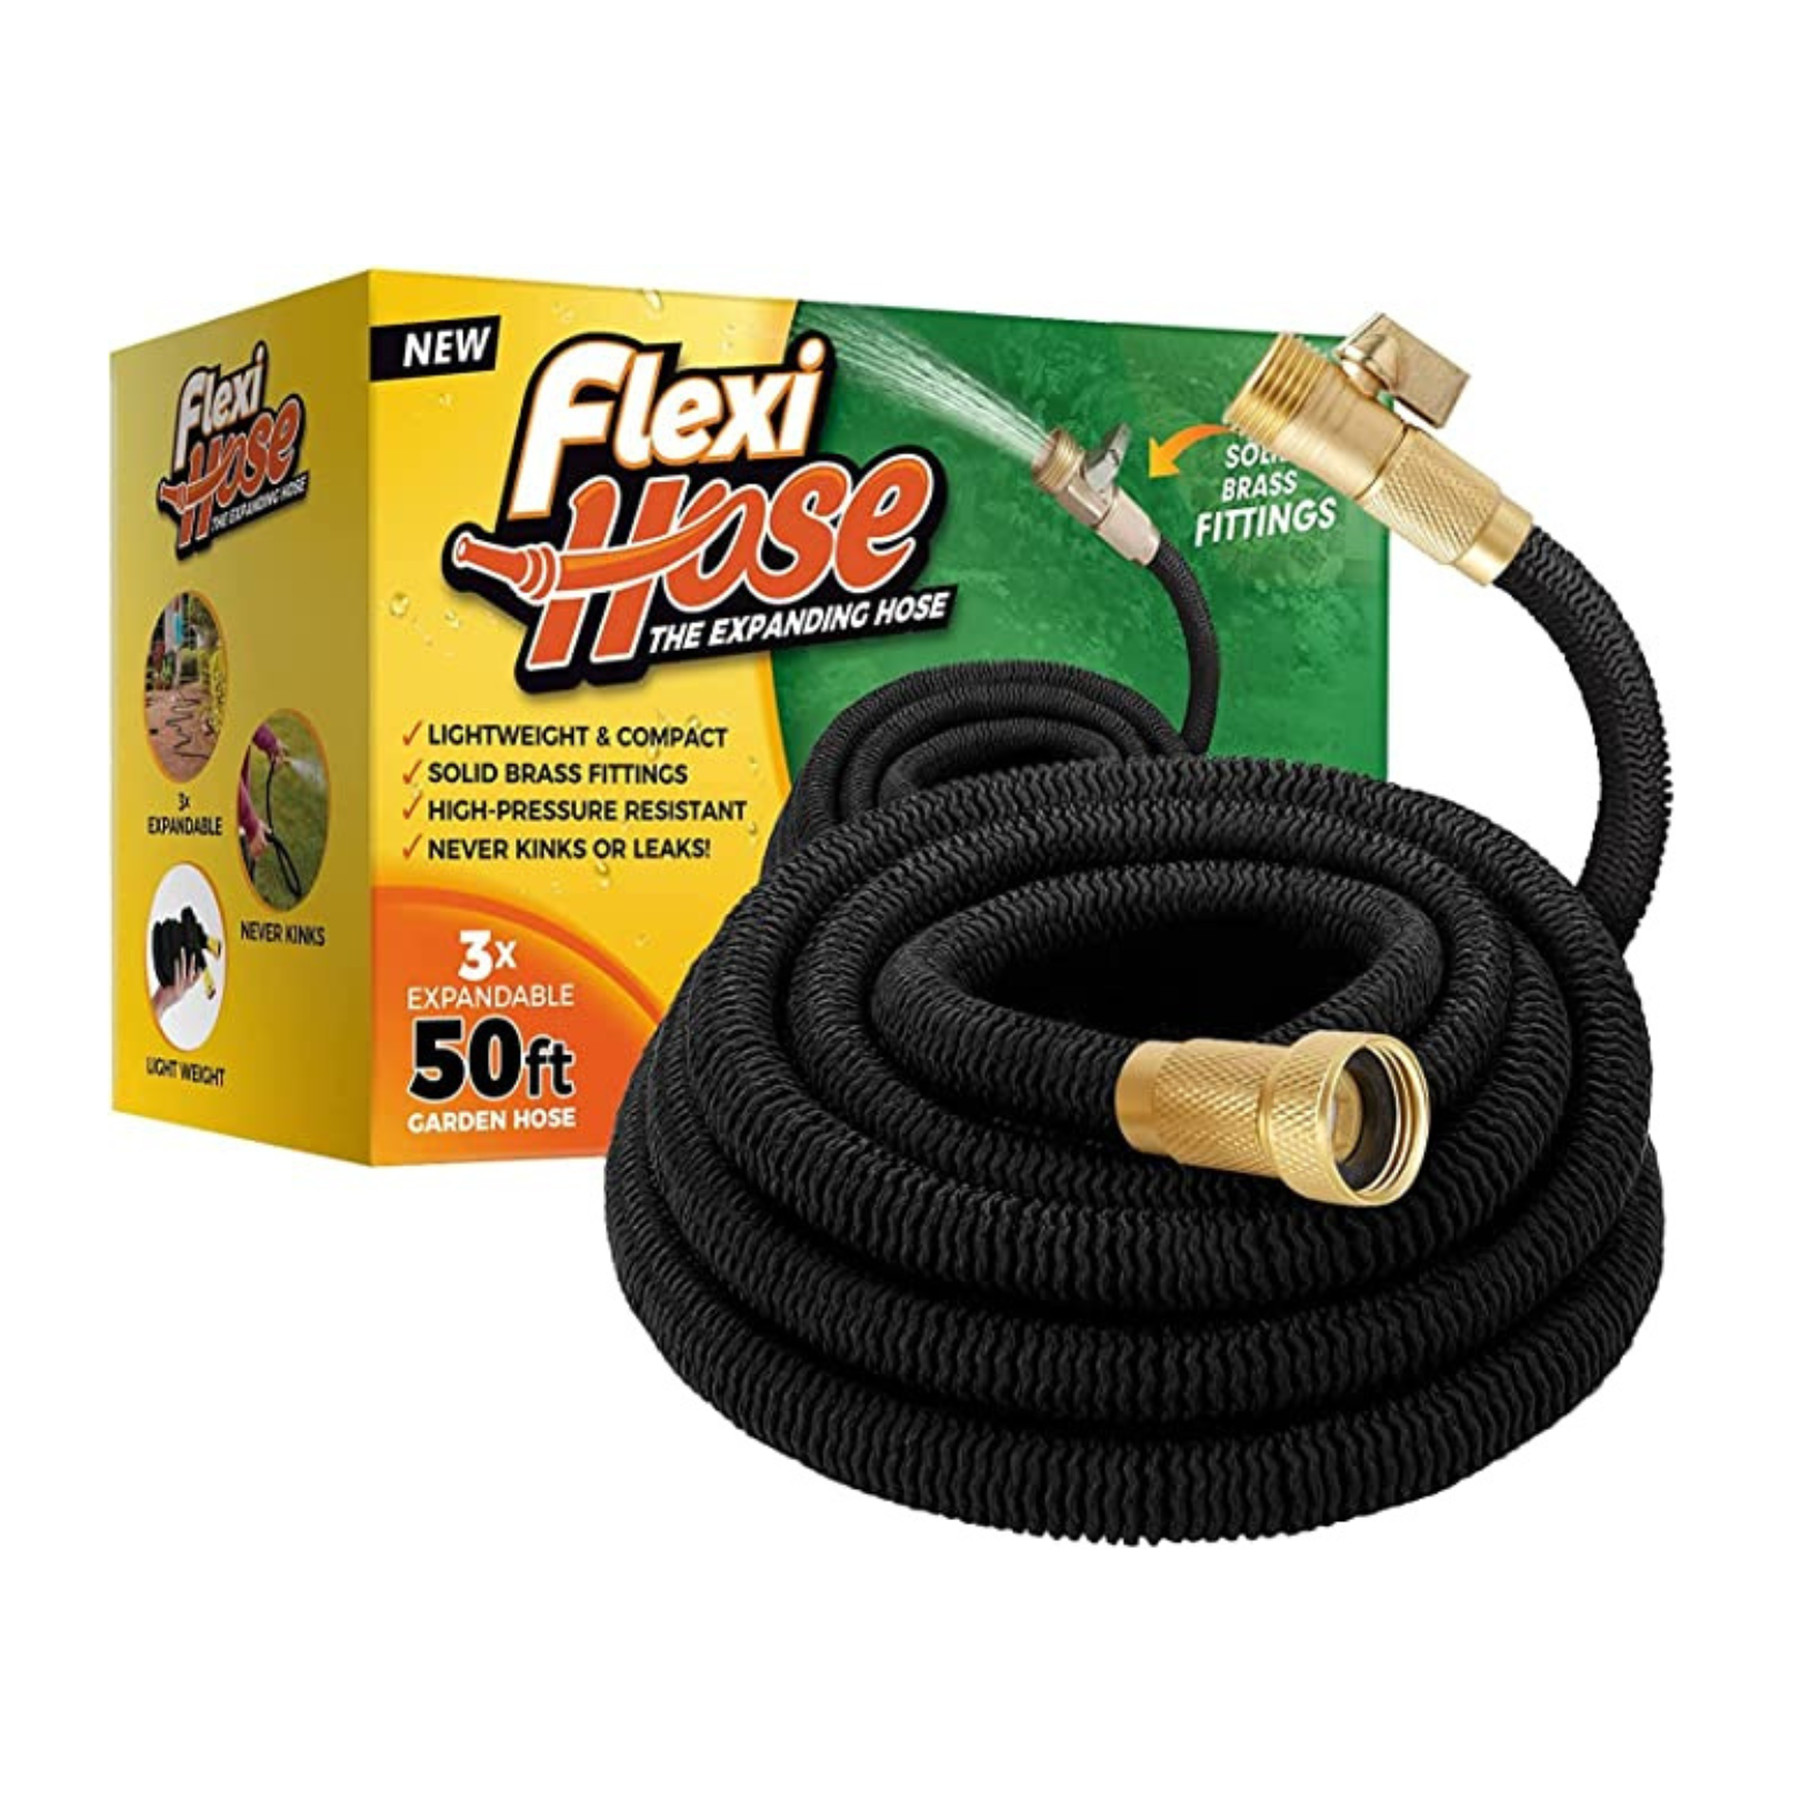 Green Flexible Water Hose with 10 Function Nozzle Durable 3-Layers Latex and 3/4 Inch Solid Fittings Lightweight Anti-kink Expanding Hose Outdoor GREENER Expandable Garden Hose 100FT 